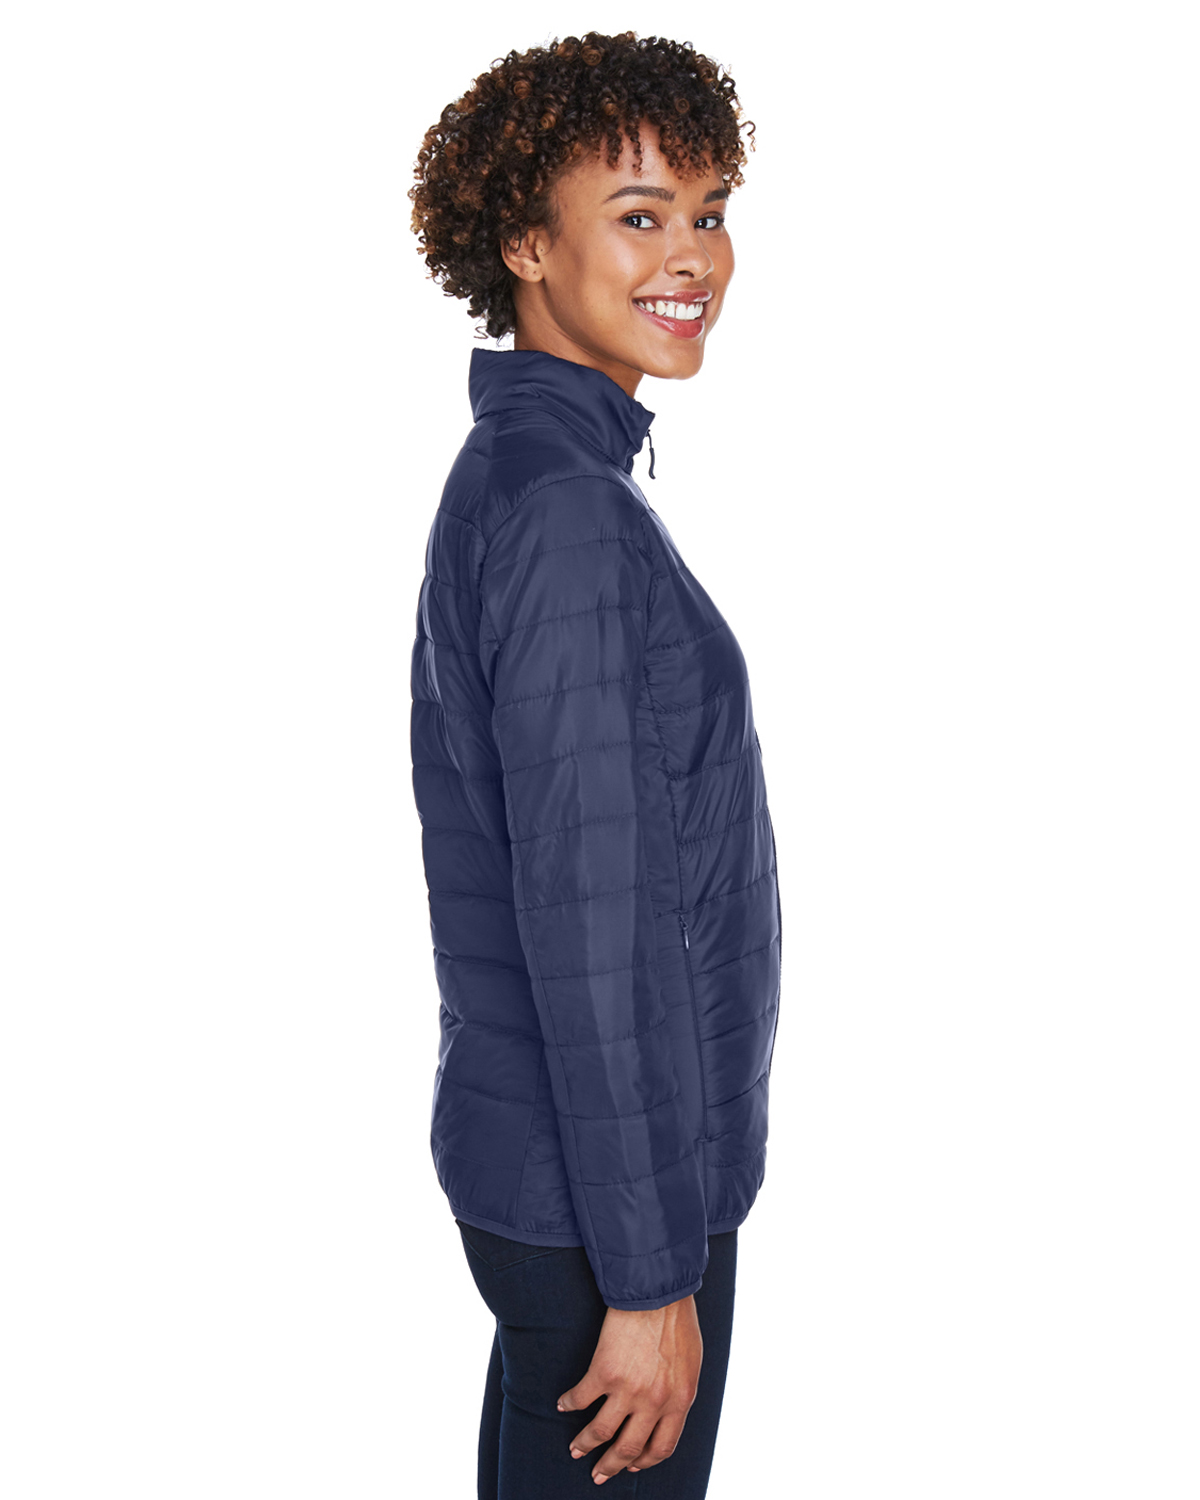 Ladies' Prevail Packable Puffer Jacket - CLASSIC NAVY - S - image 3 of 3